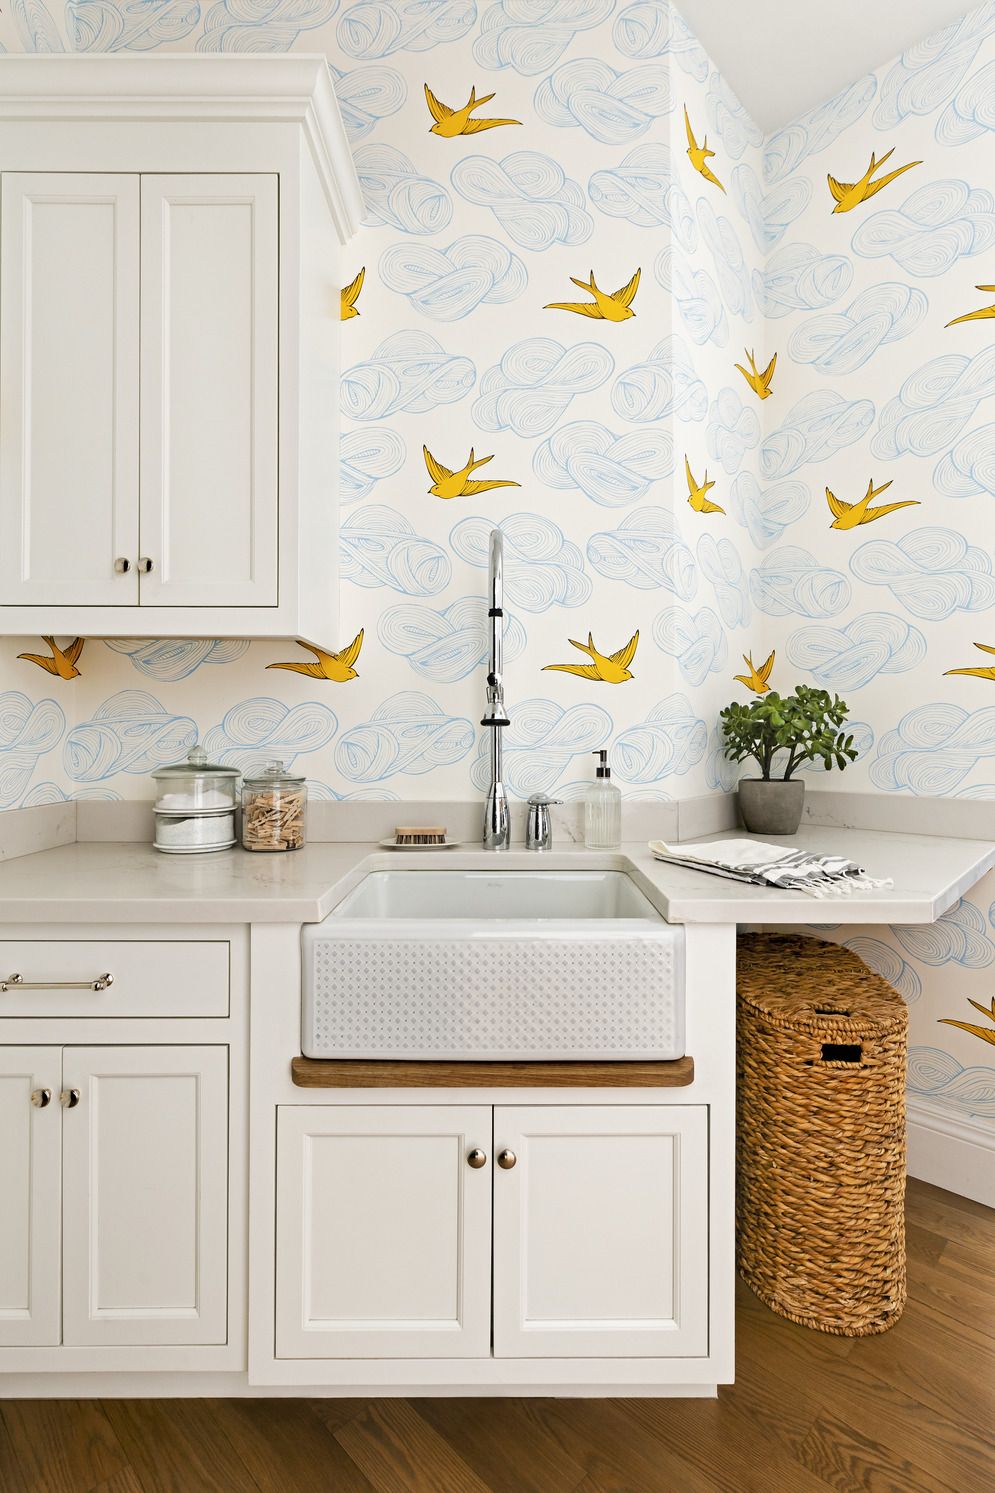 Bold Wallpaper Brings Color and Fun to the Laundry Room